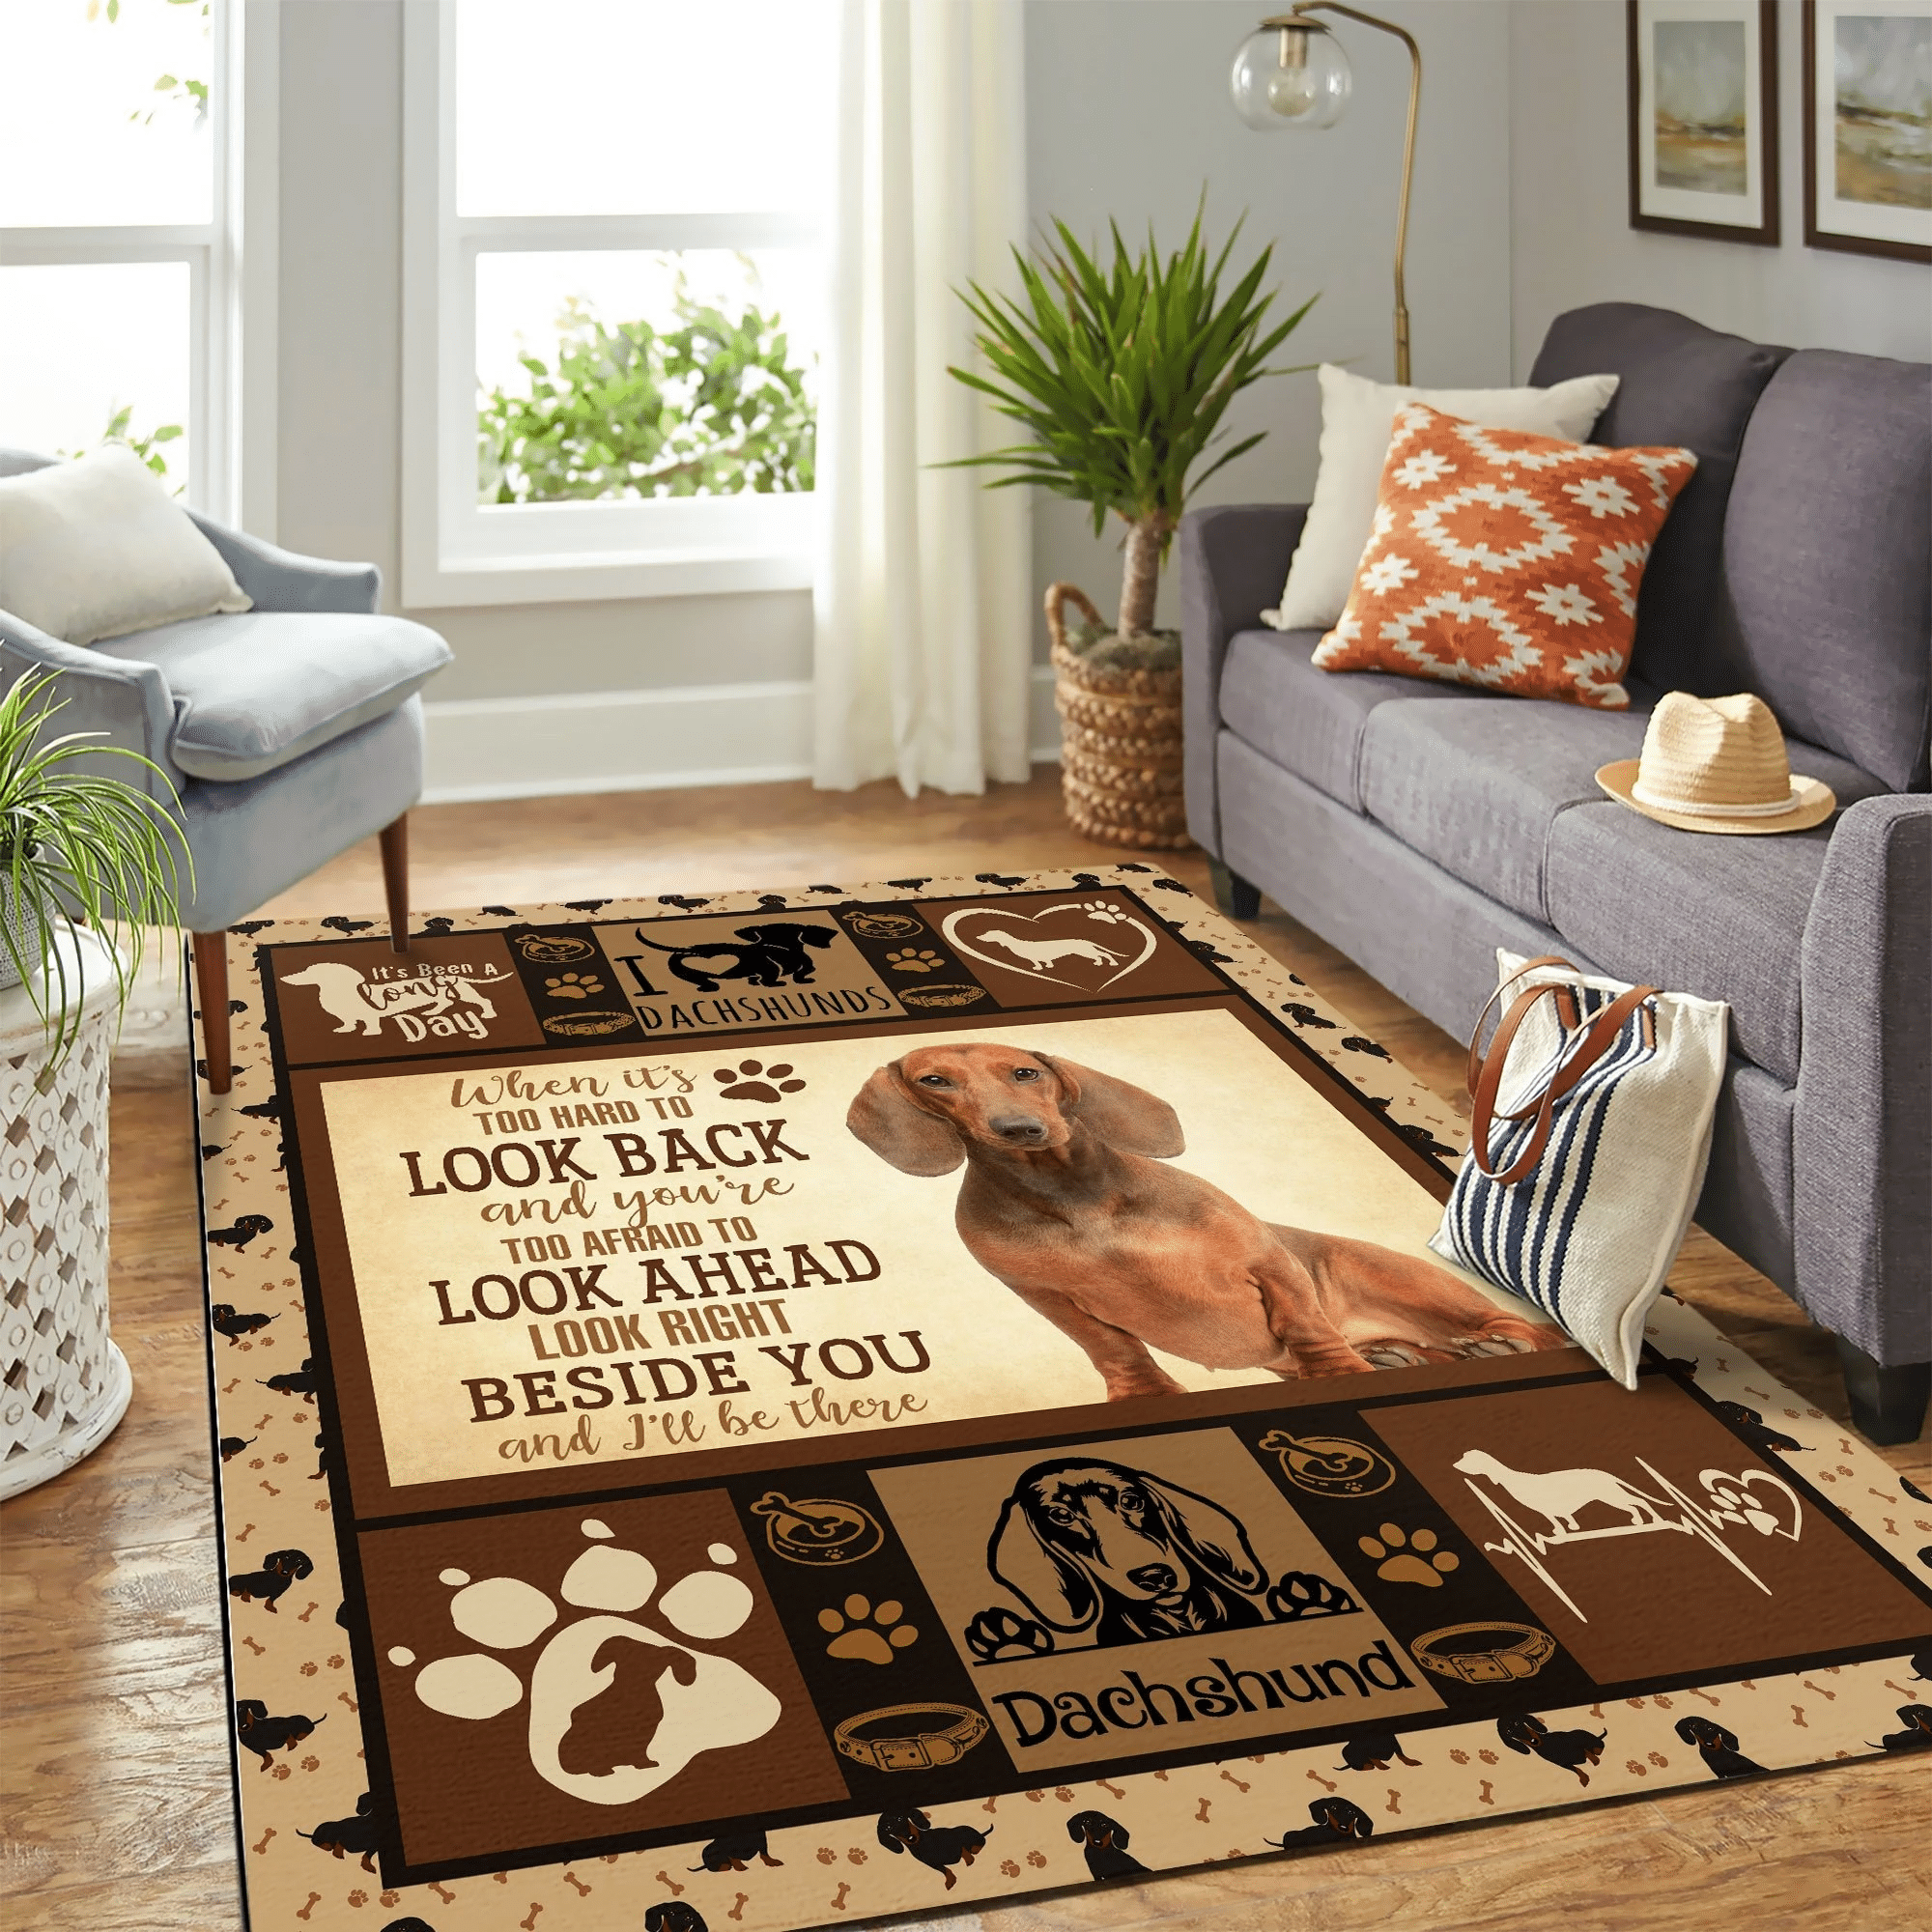 Dachshund New Quilt Copy Mk Carpet Area Rug Chrismas Gift - Indoor Outdoor Rugs 1